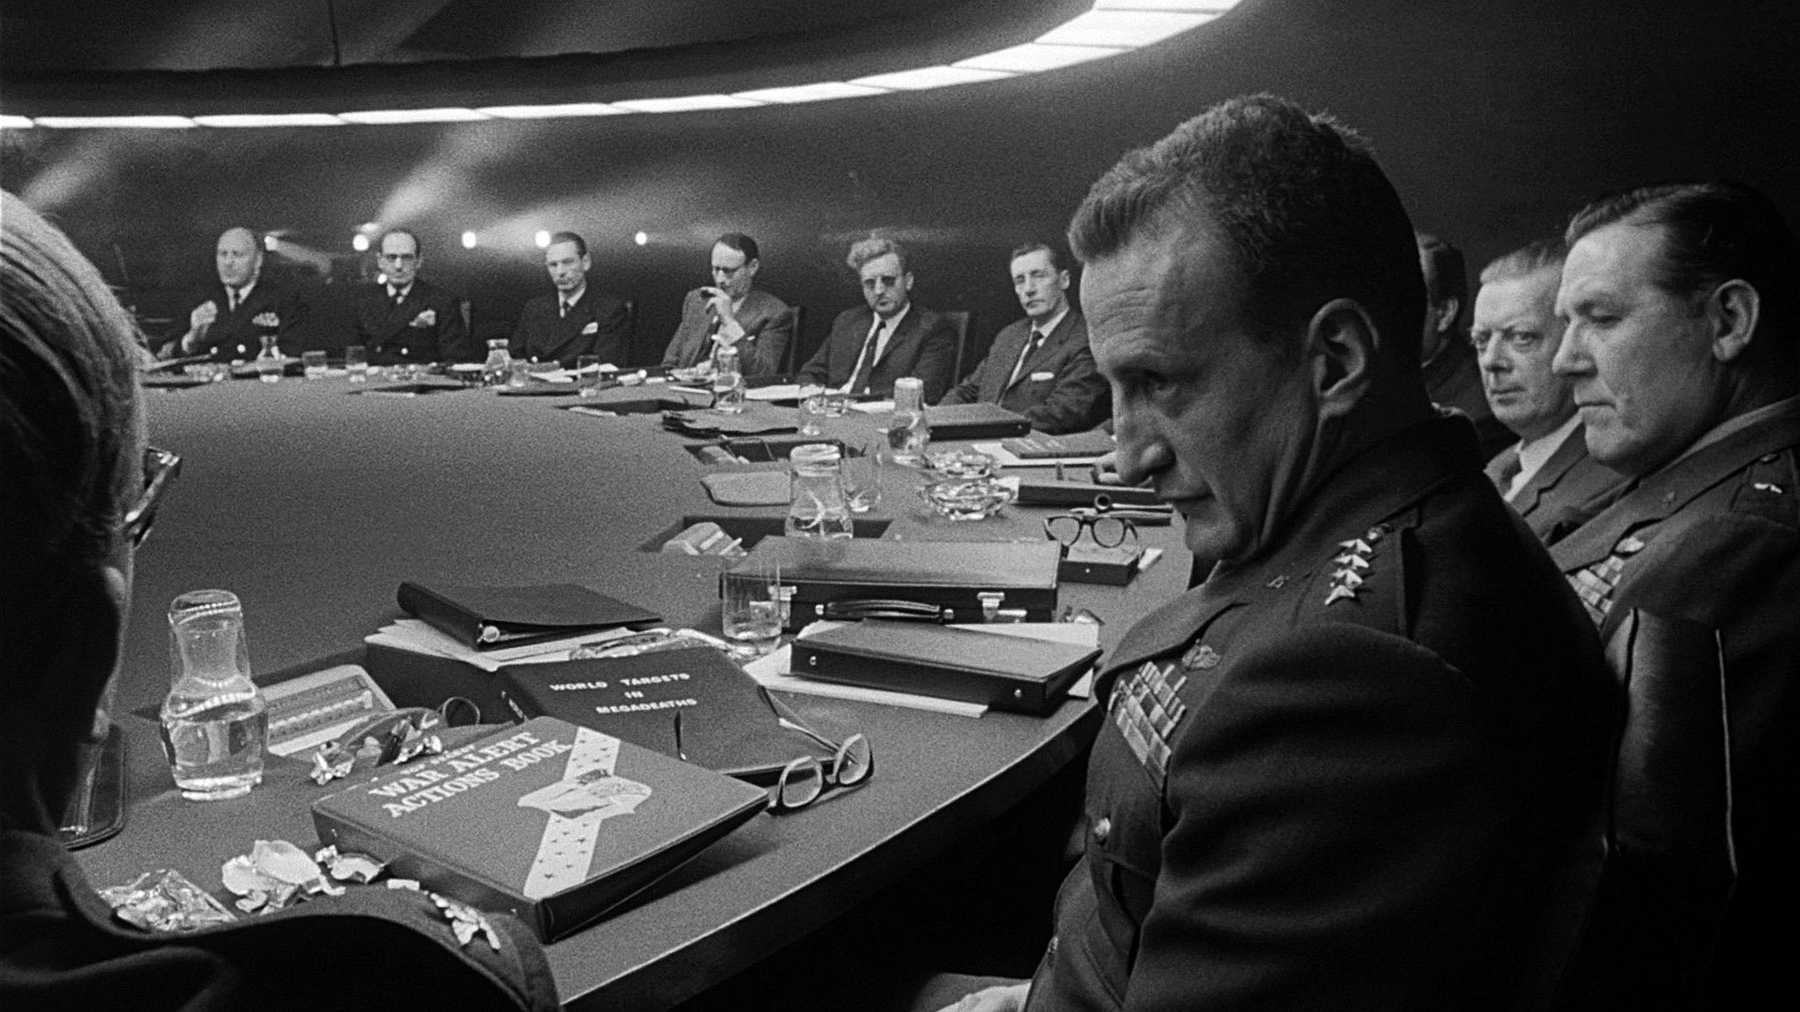 Who Designed the Classic Ring Pendant in 1964's Dr. Strangelove'? — Insights